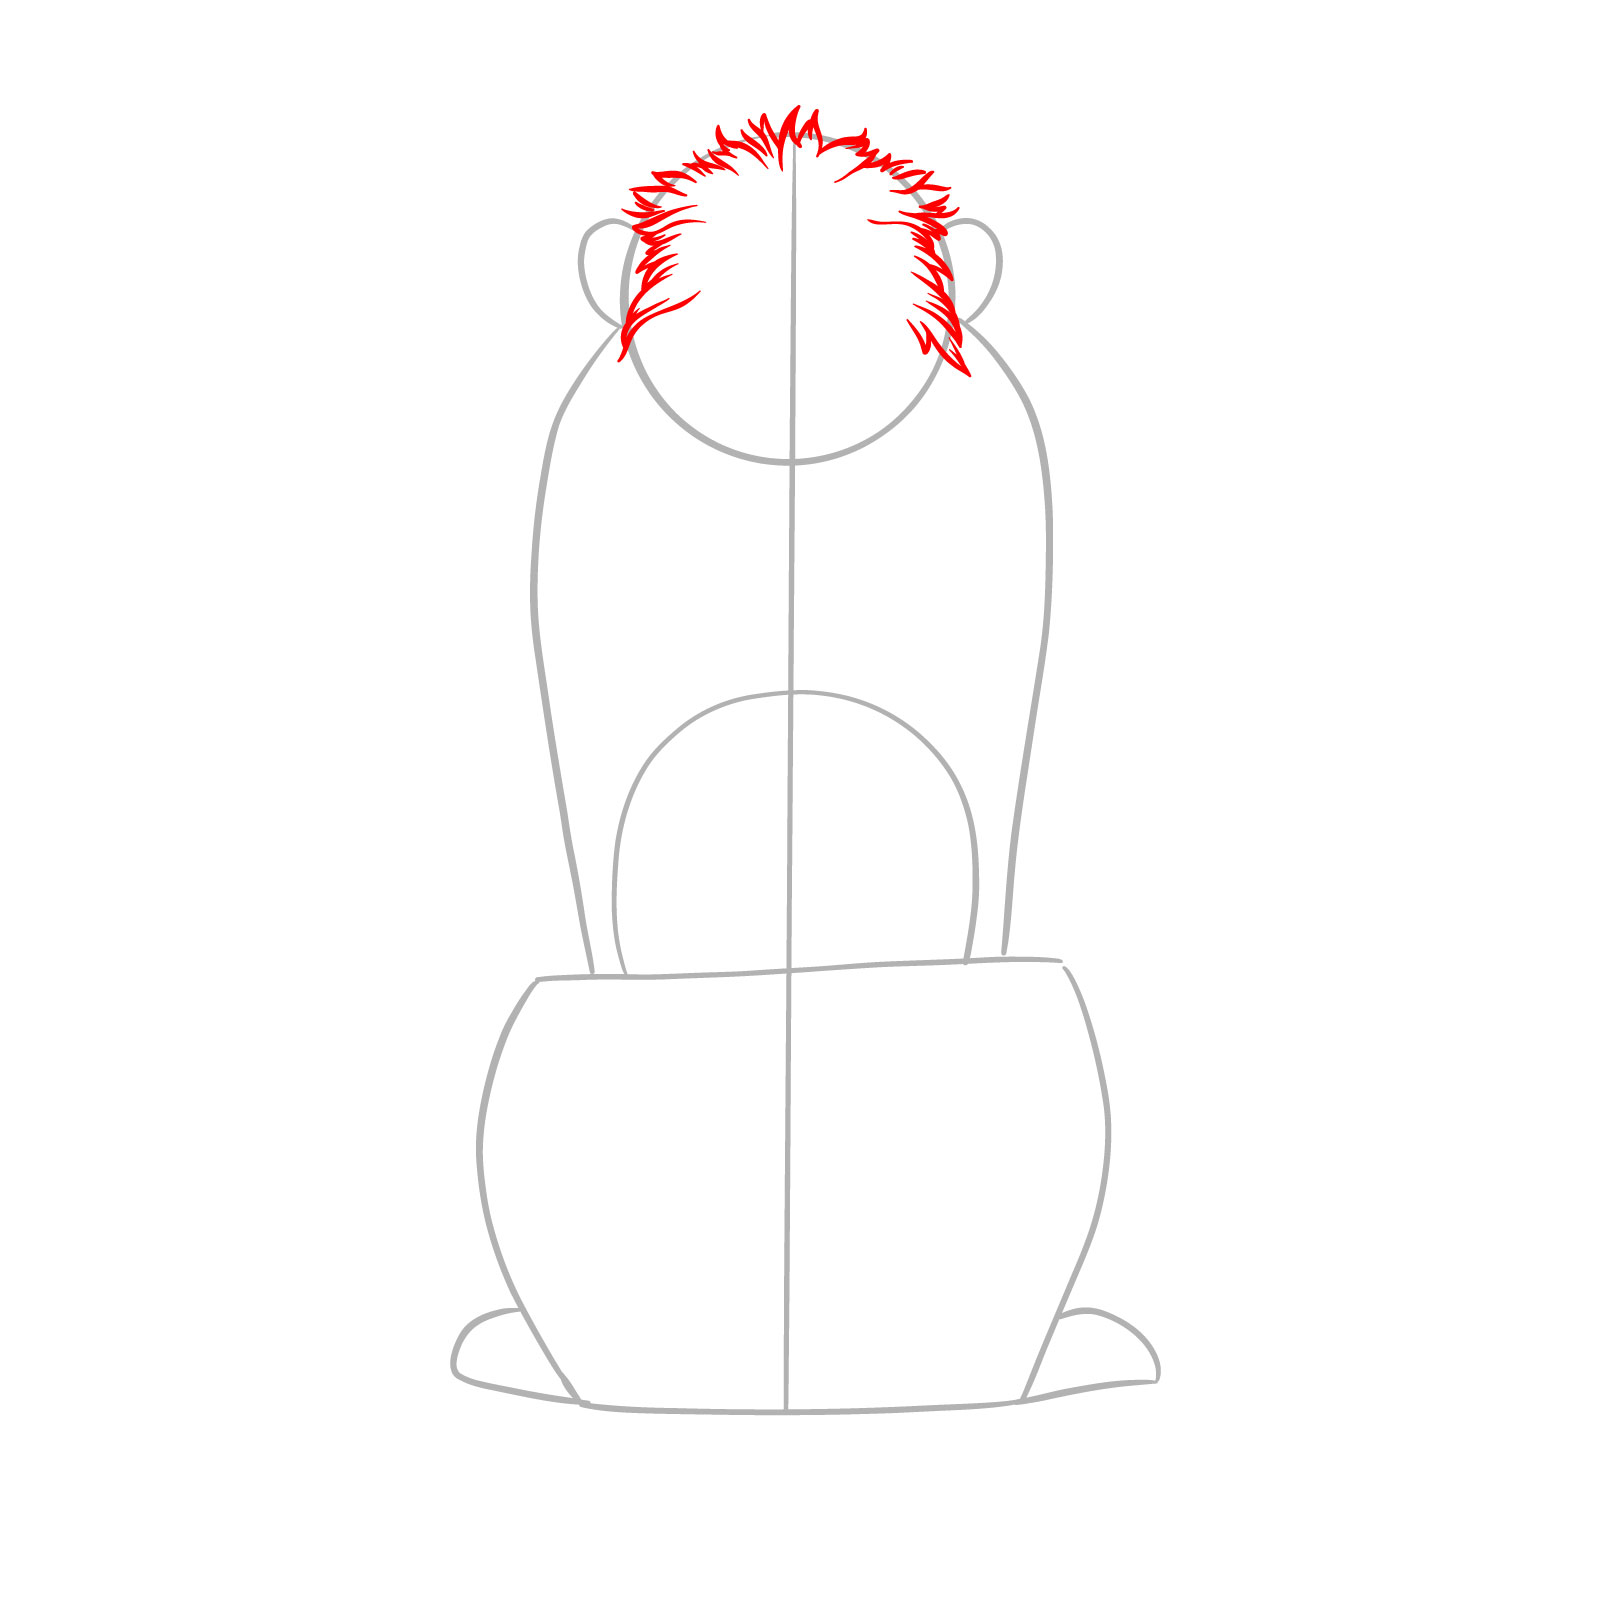 Step 3 in illustrating a sitting lion from the back view, detailing with fur lines on the head